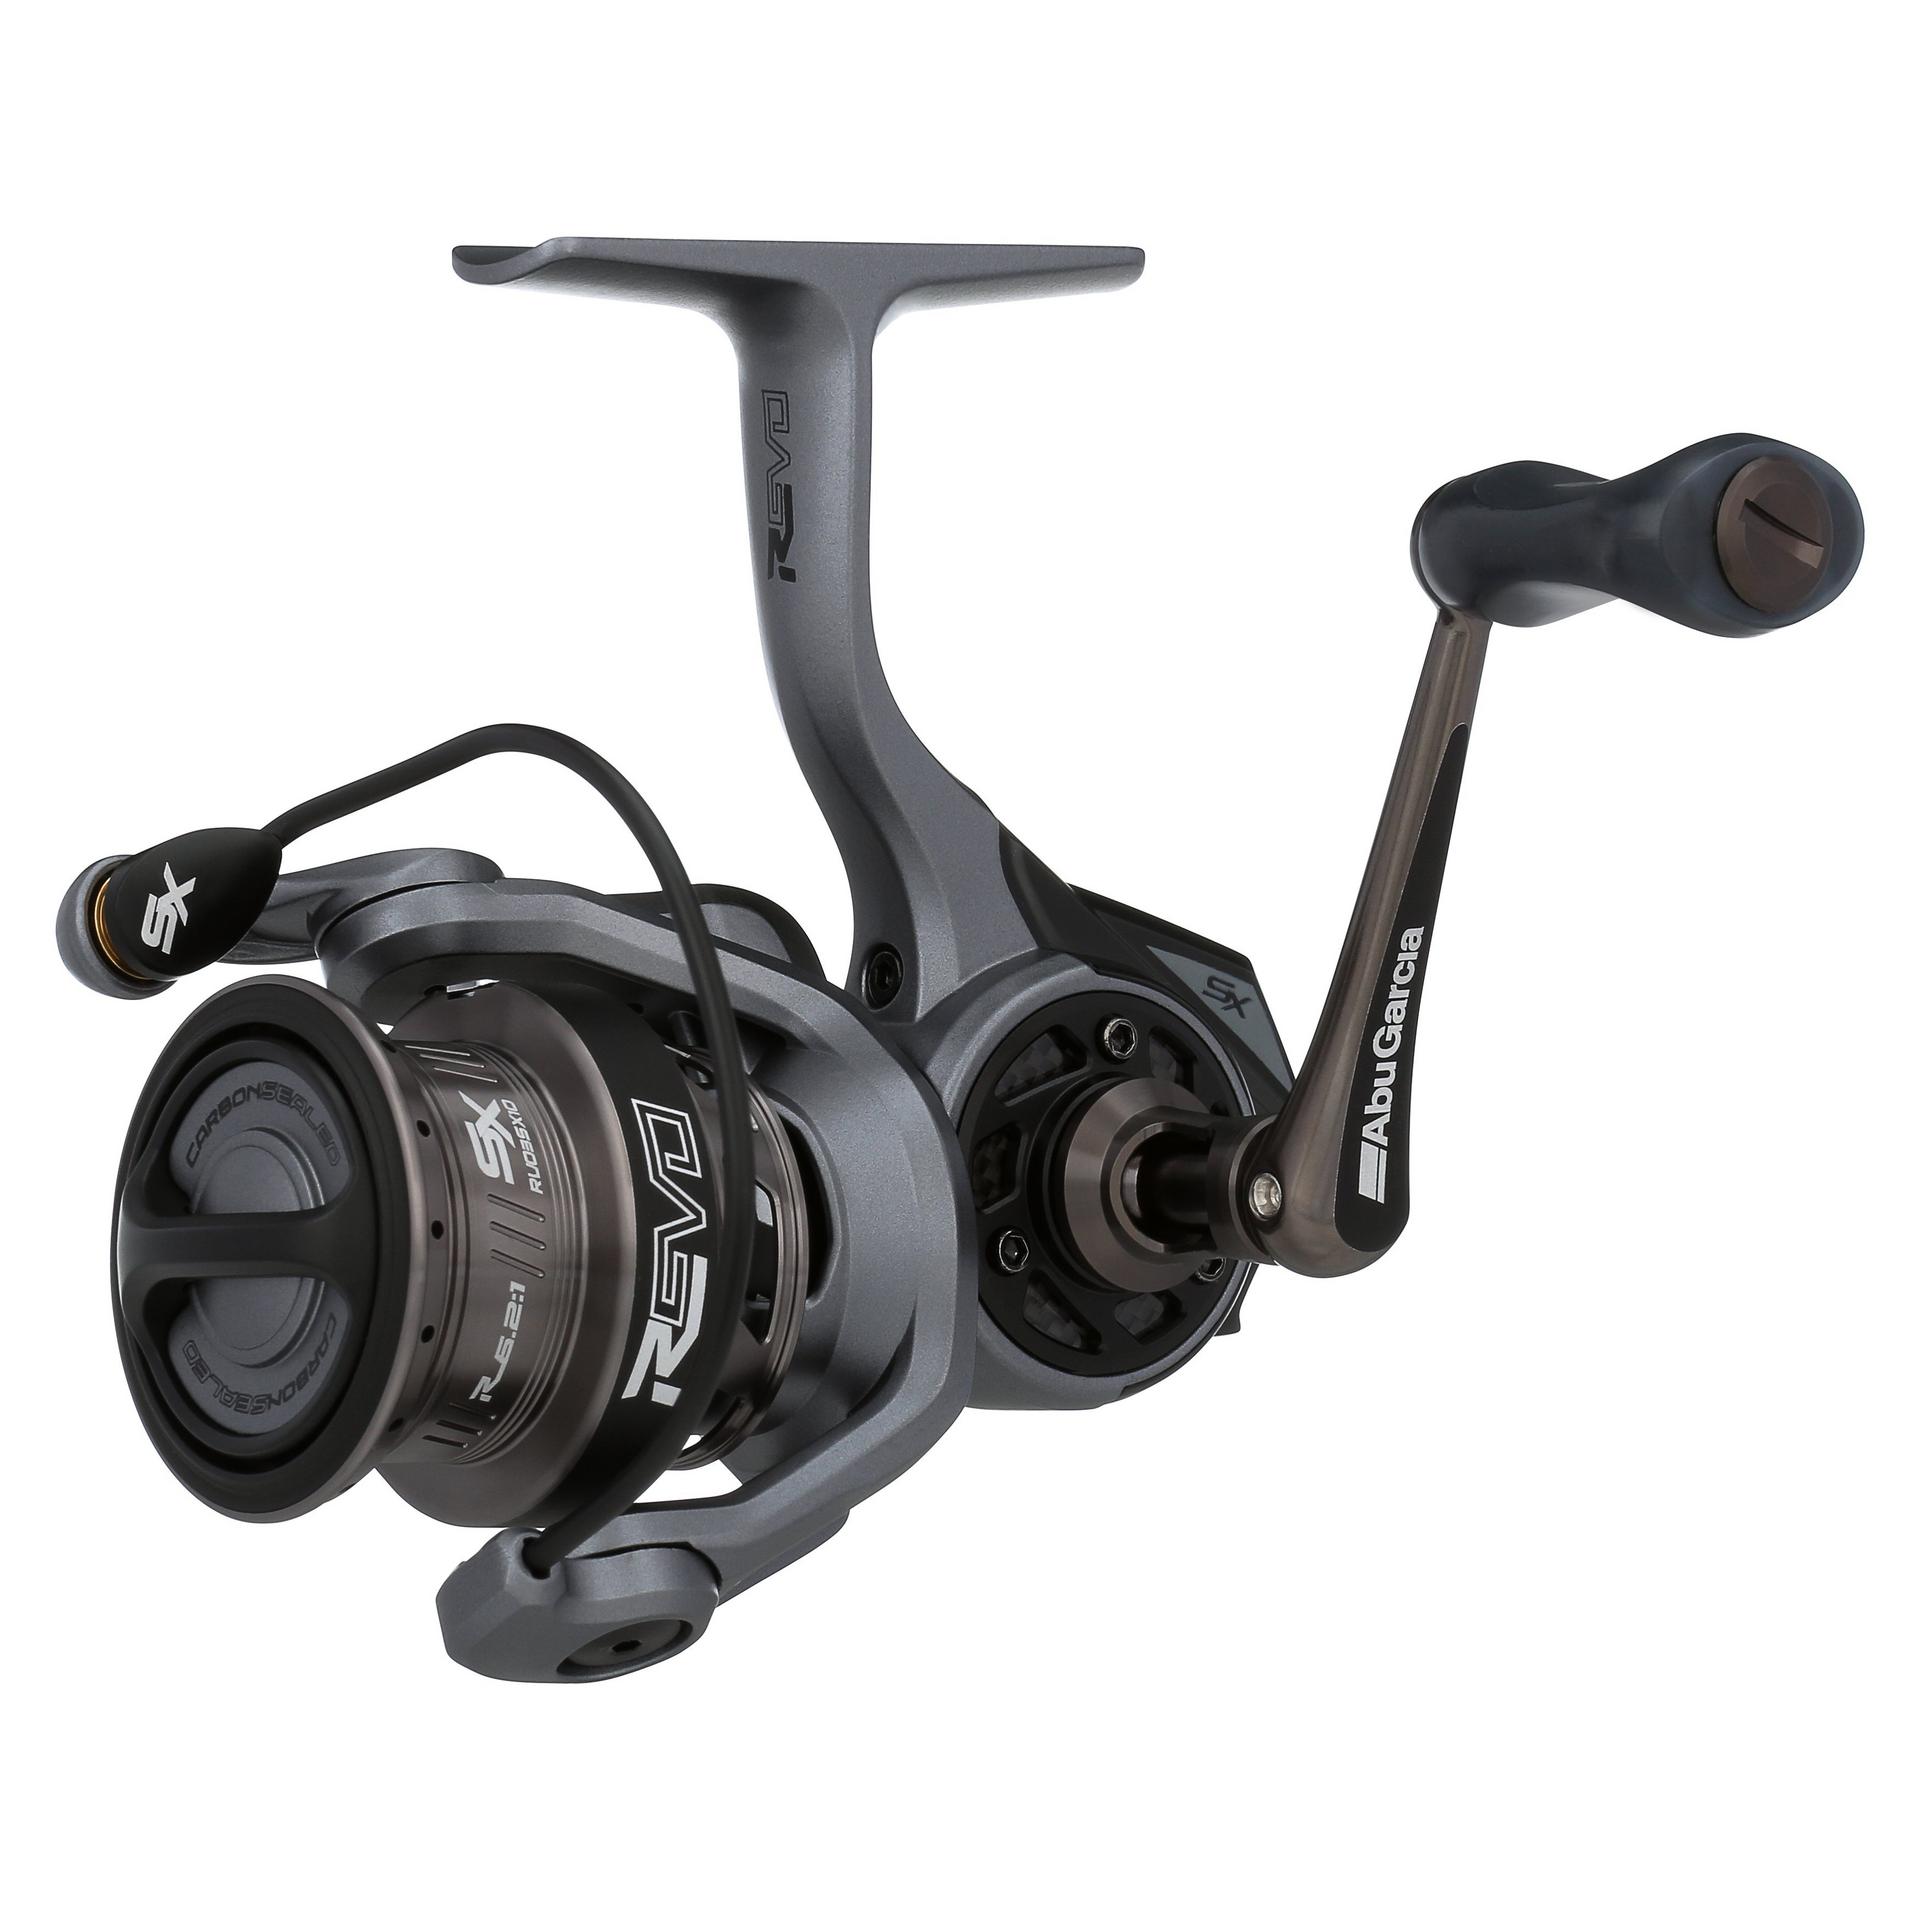 Abu Garcia Revo X Spinning Reel For A Bass Test + Let's Bike in Fall 